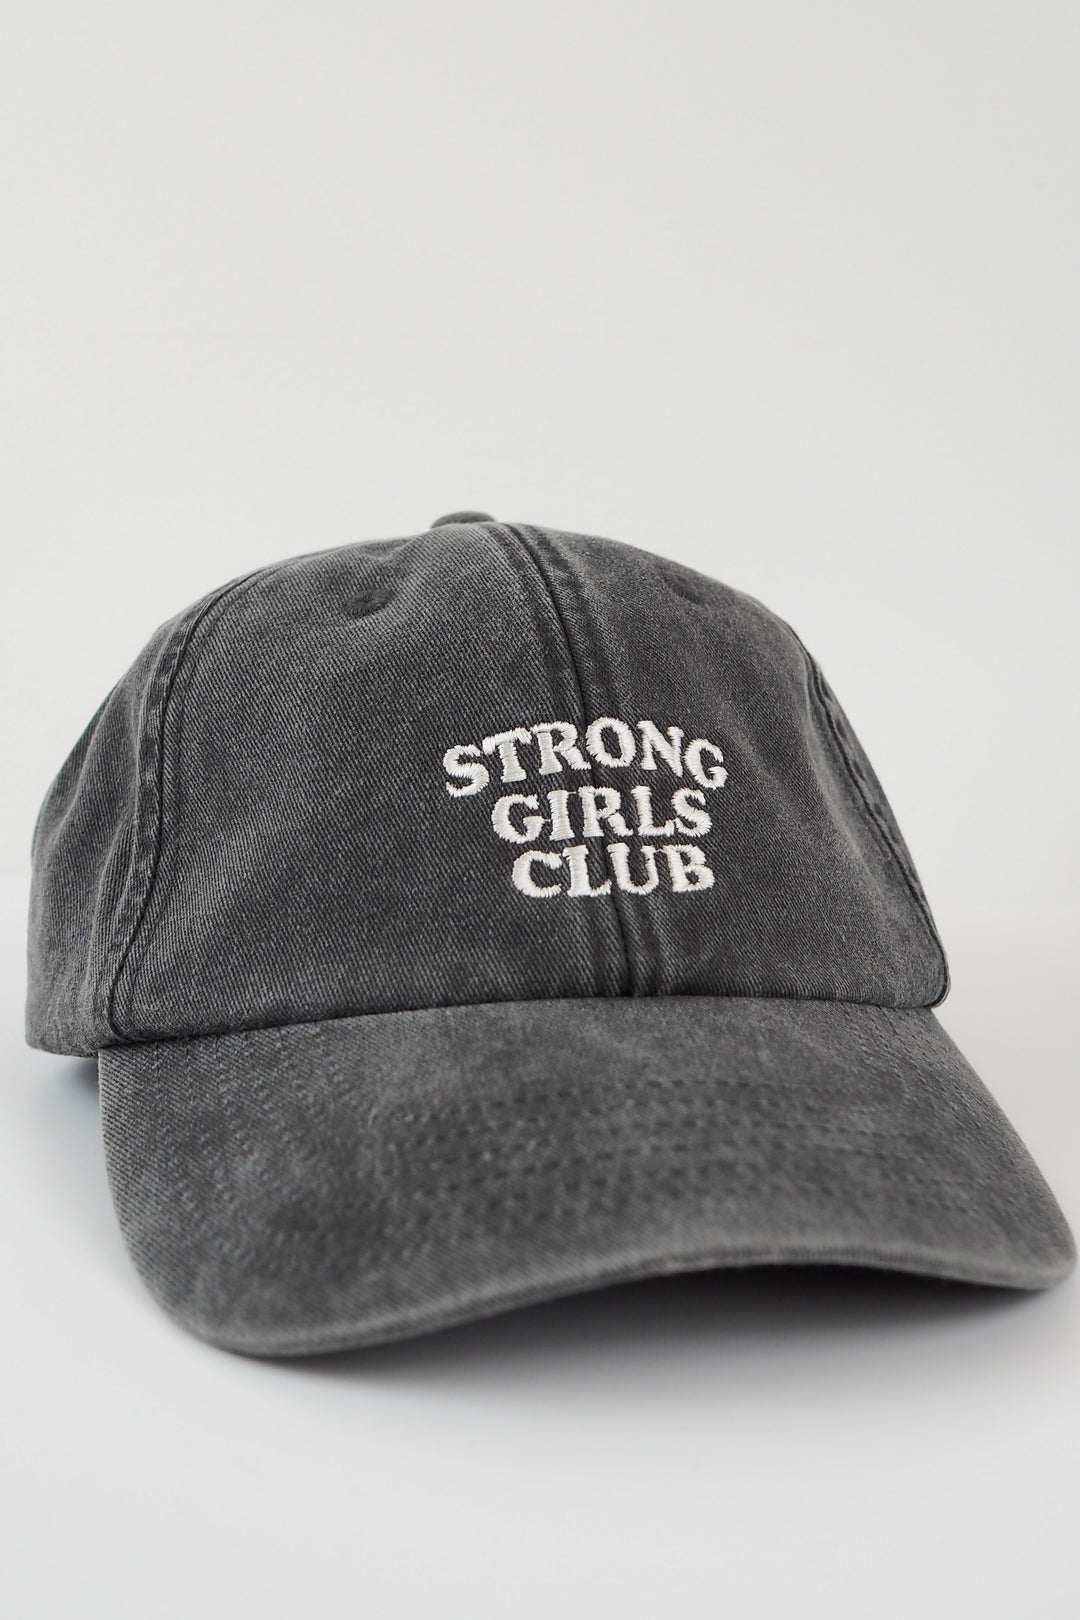 Strong Girls Club Vintage Charcoal Wash Cap